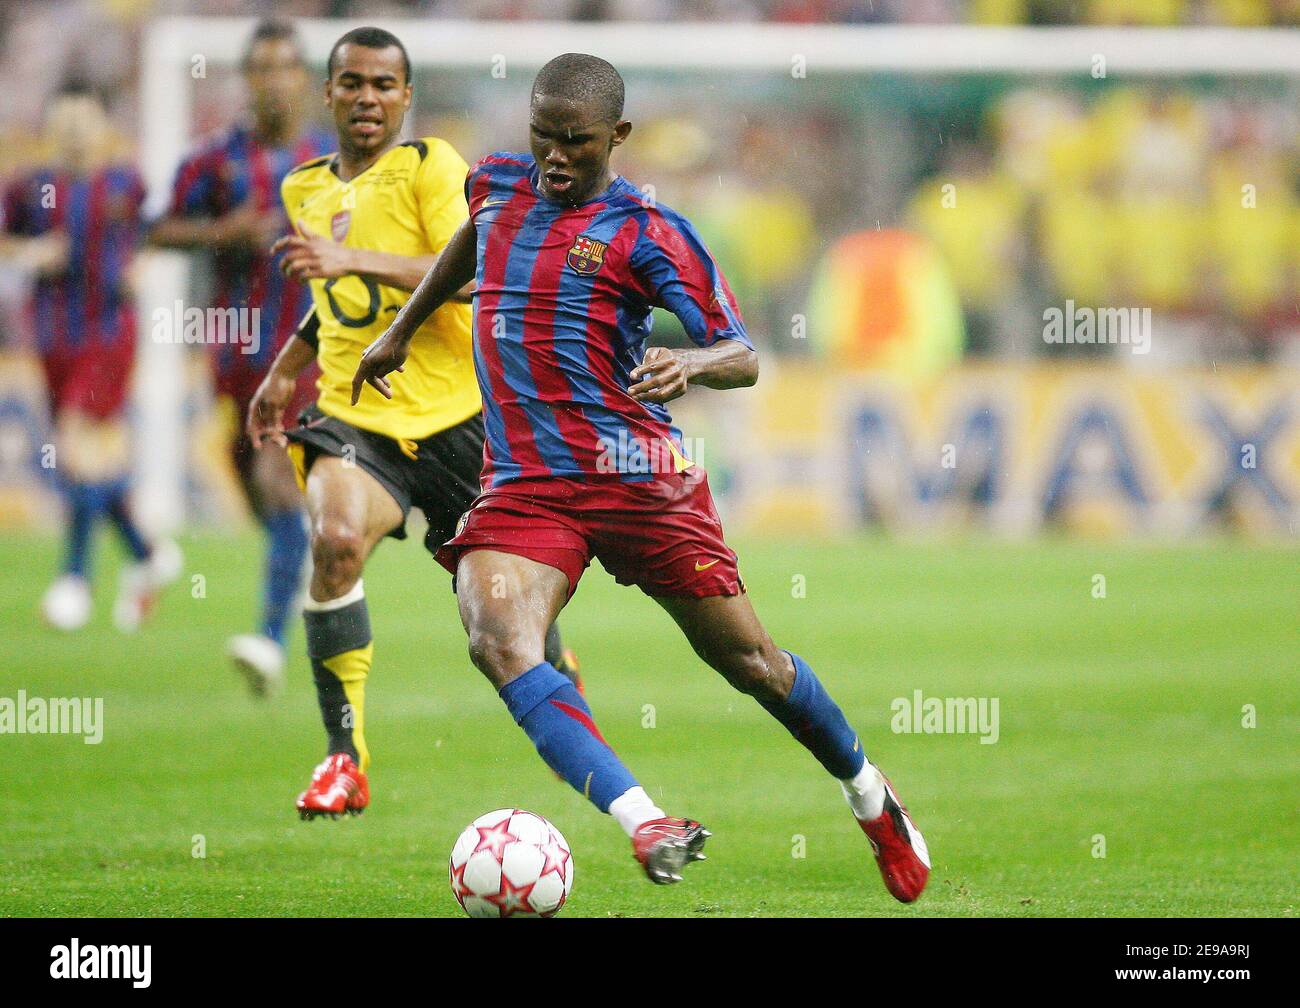 Barcelona'S Samuel Eto'O In Action During The Champions League Final,  Barcelona Vs Arsenal, At The Stade De France, In Saint Denis, Near Paris,  France, On May 17, 2006. Barcelona Won 2-1. Photo